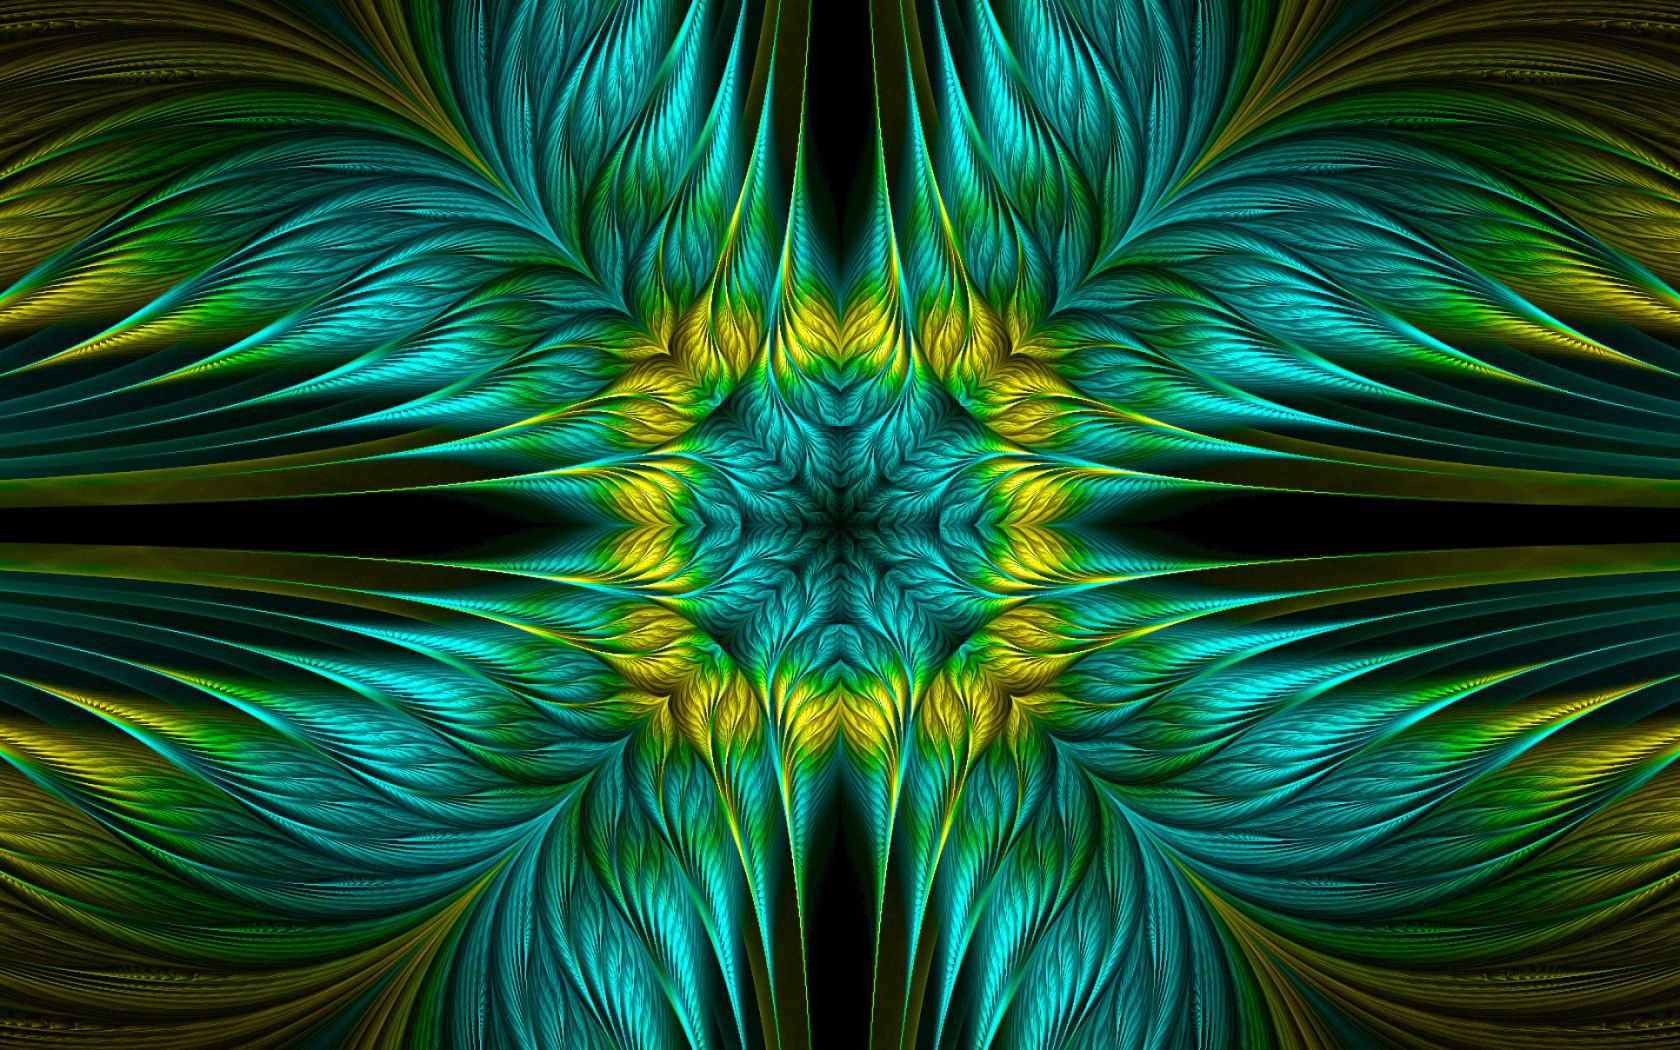 95234 download wallpaper green, patterns, abstract, fractal screensavers and pictures for free